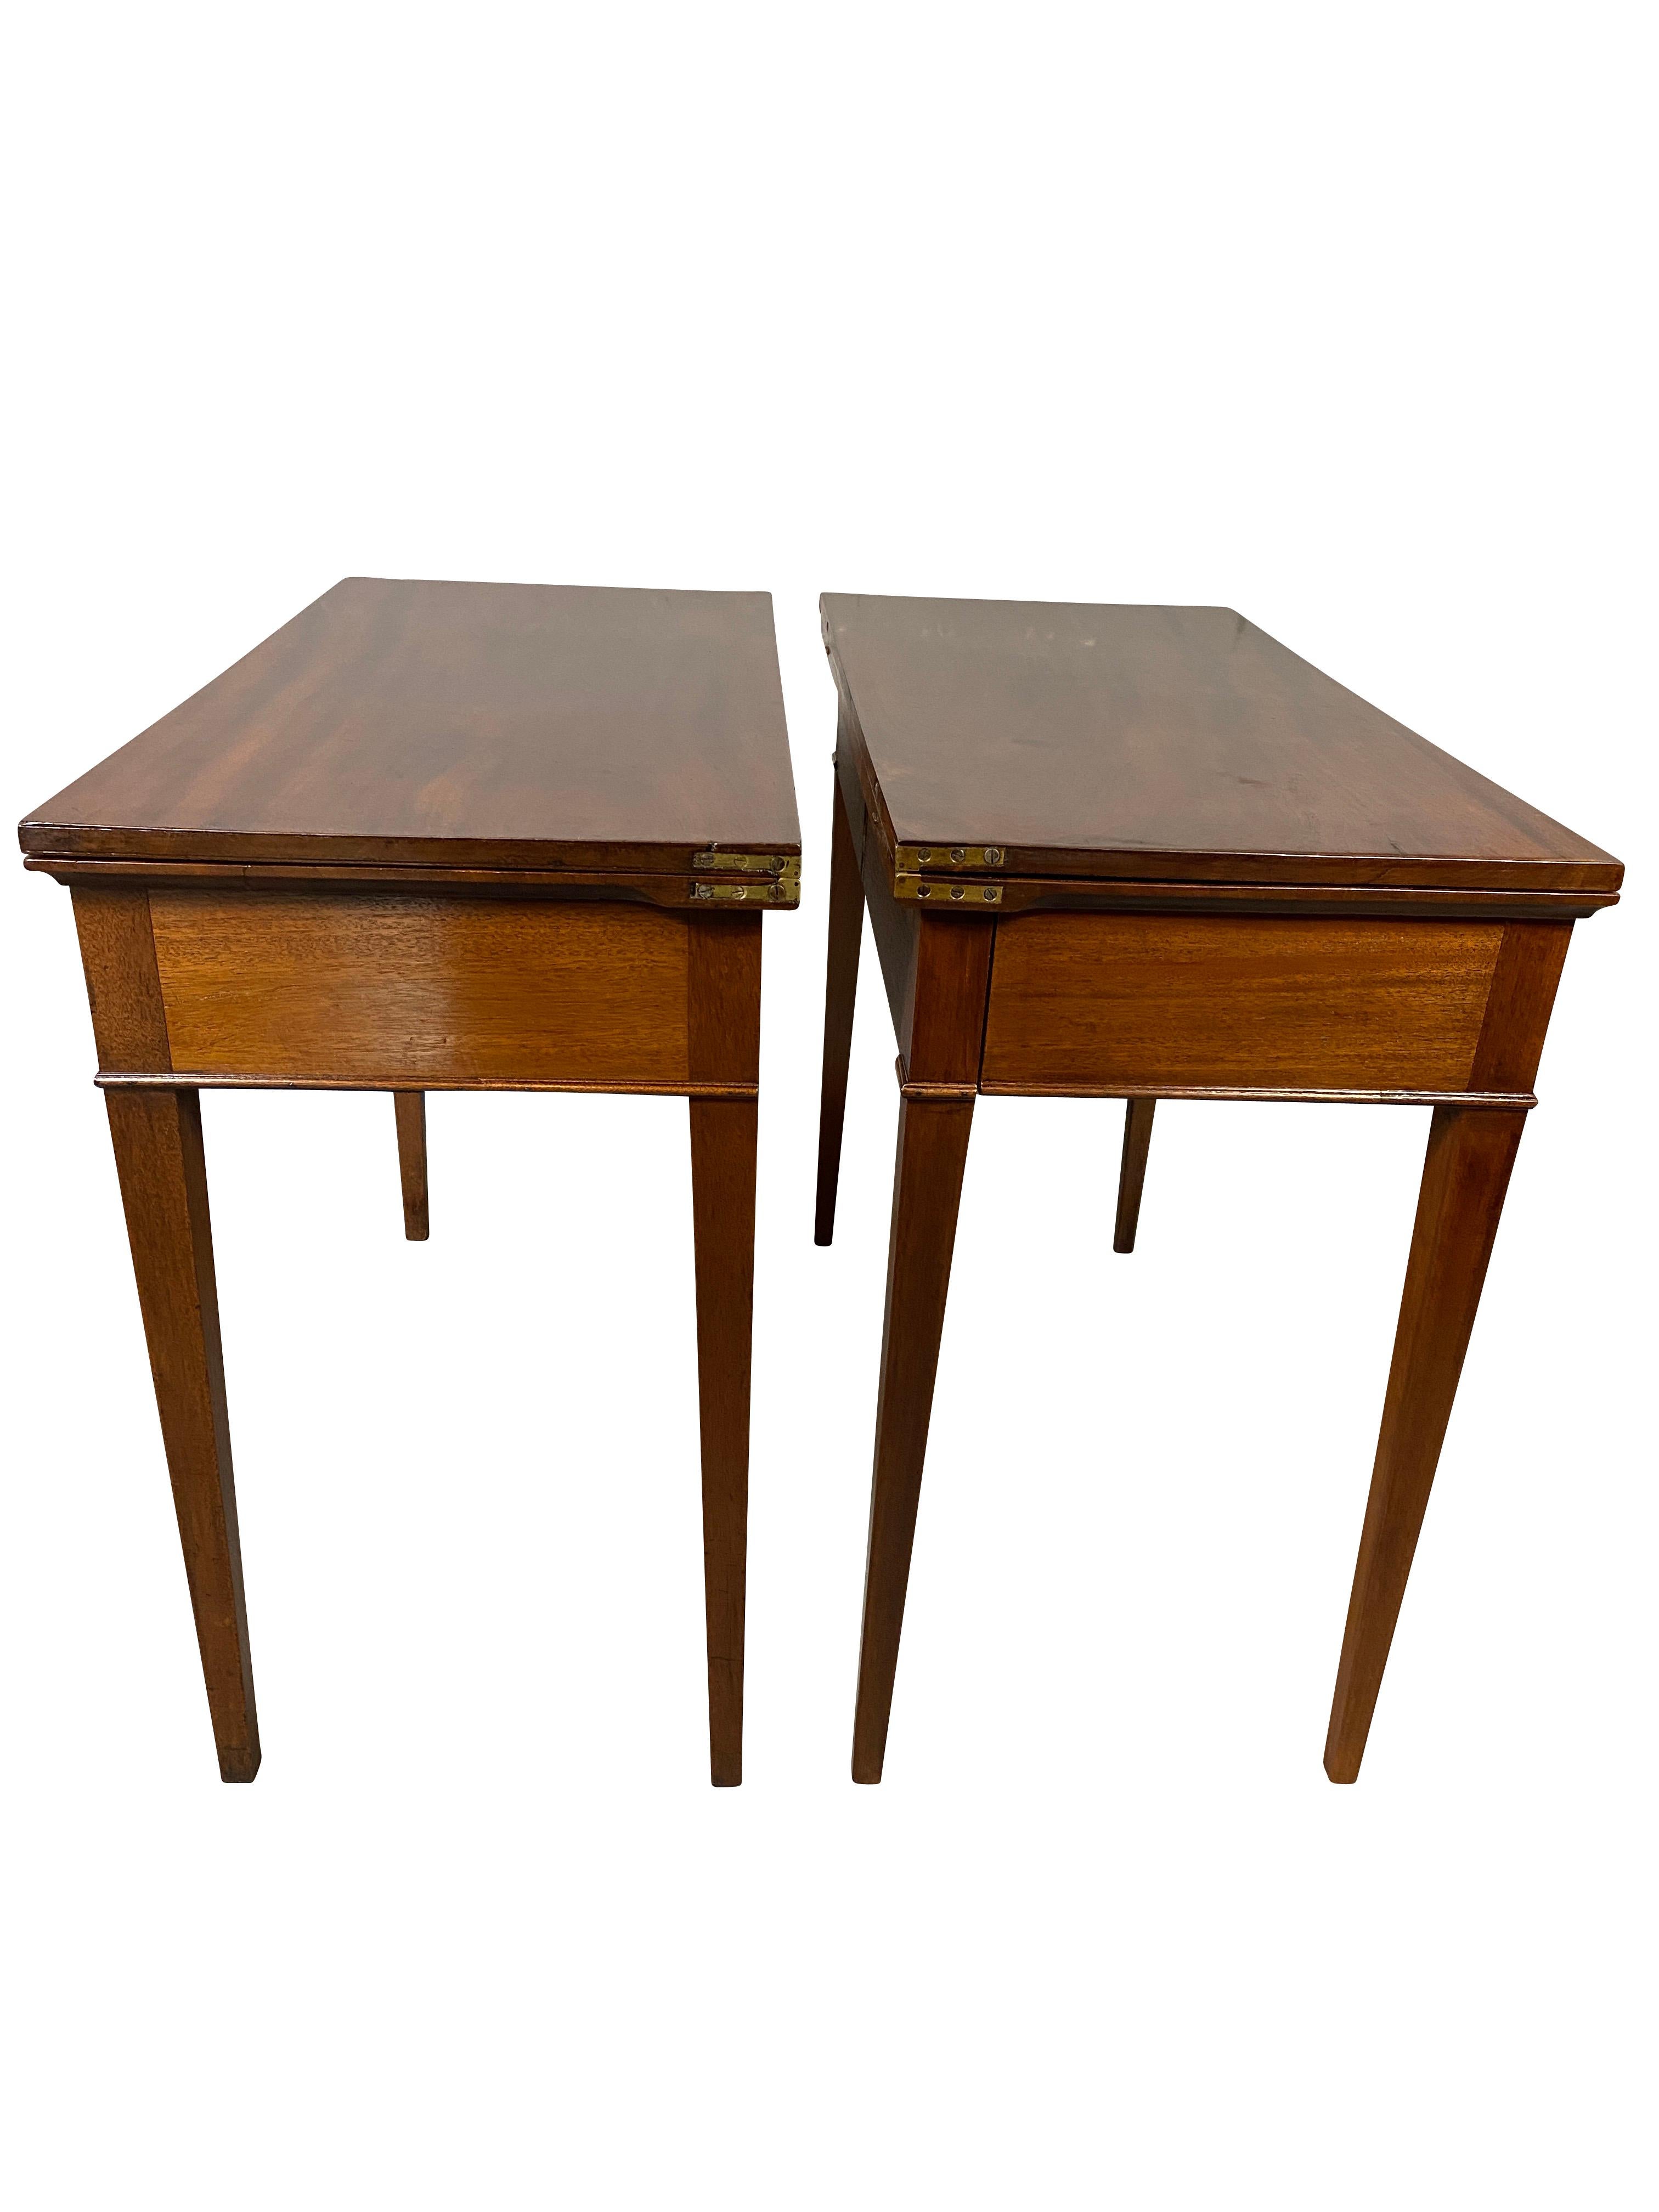 Early 19th Century Pair of George III Mahogany Games Tables For Sale